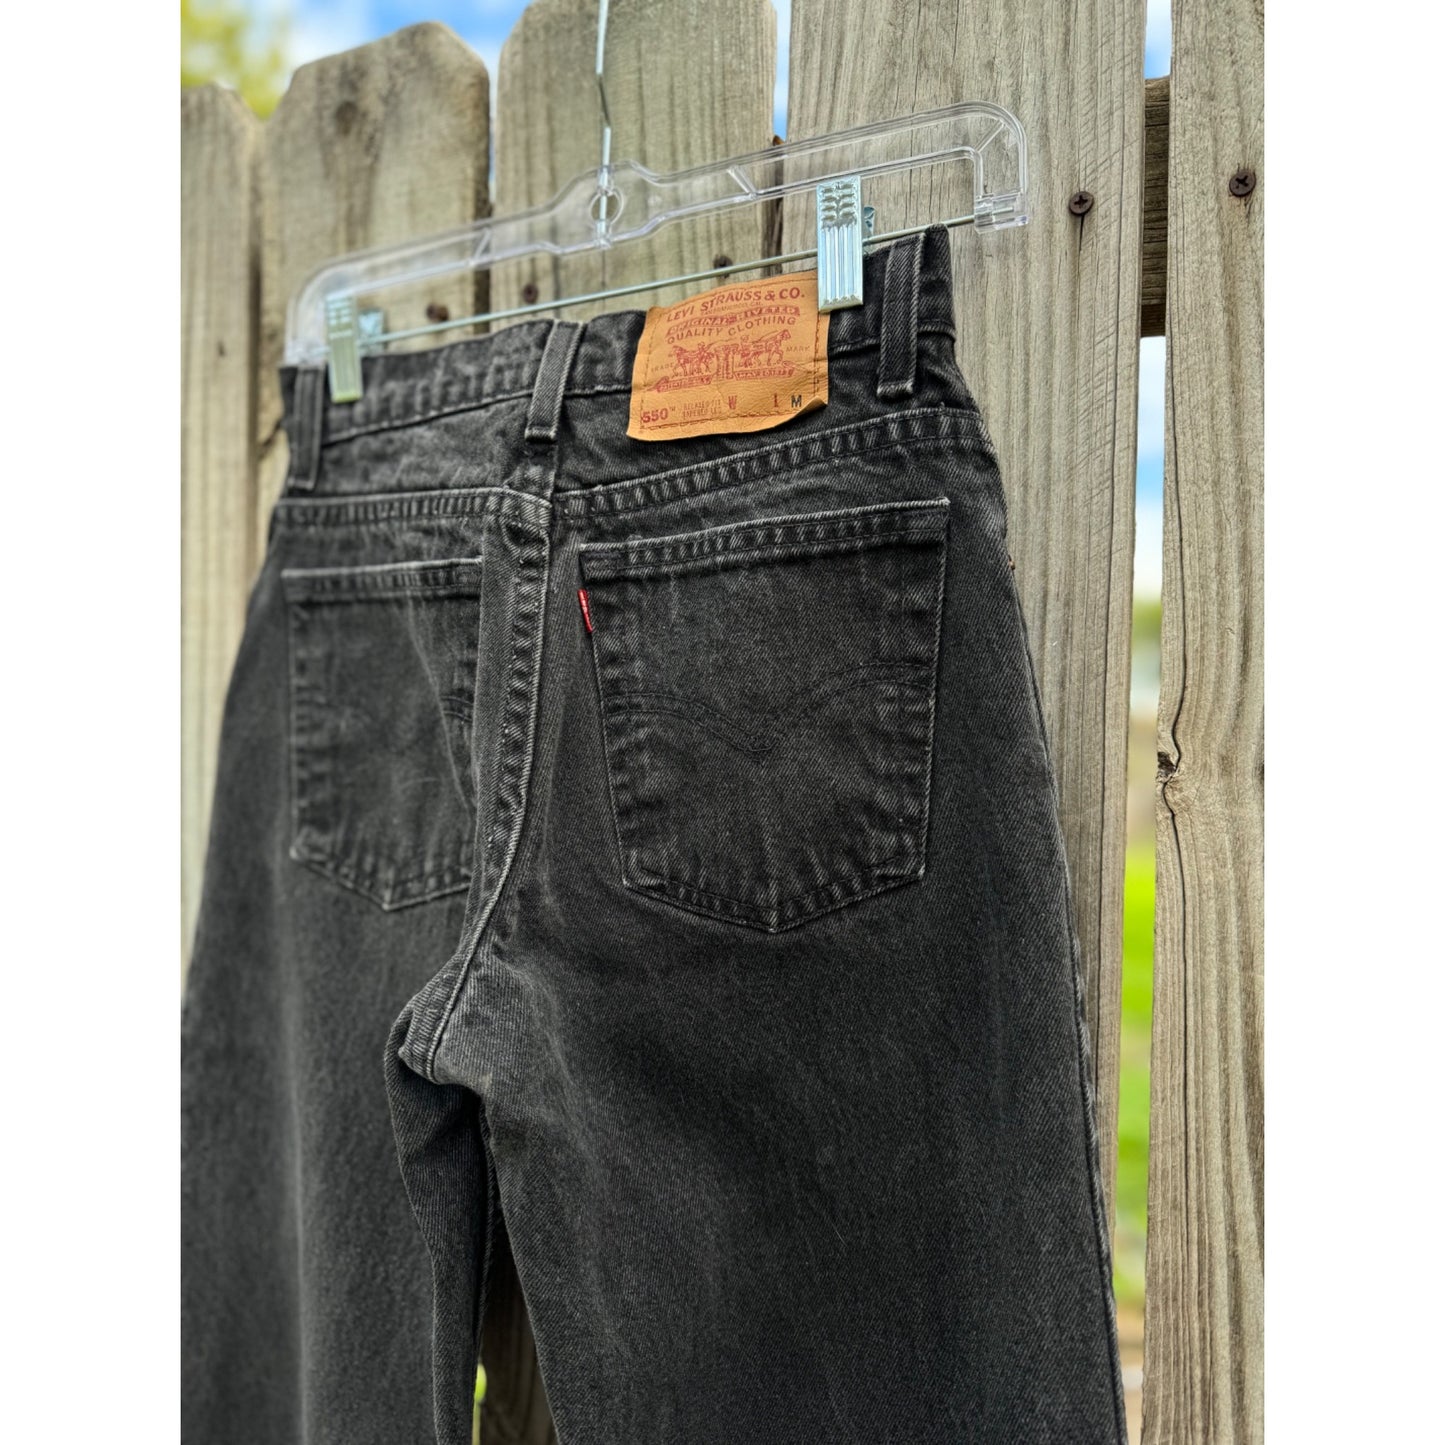 90's Levi's 550 Relaxed Fit Tapered Leg Black Denim Jeans 5